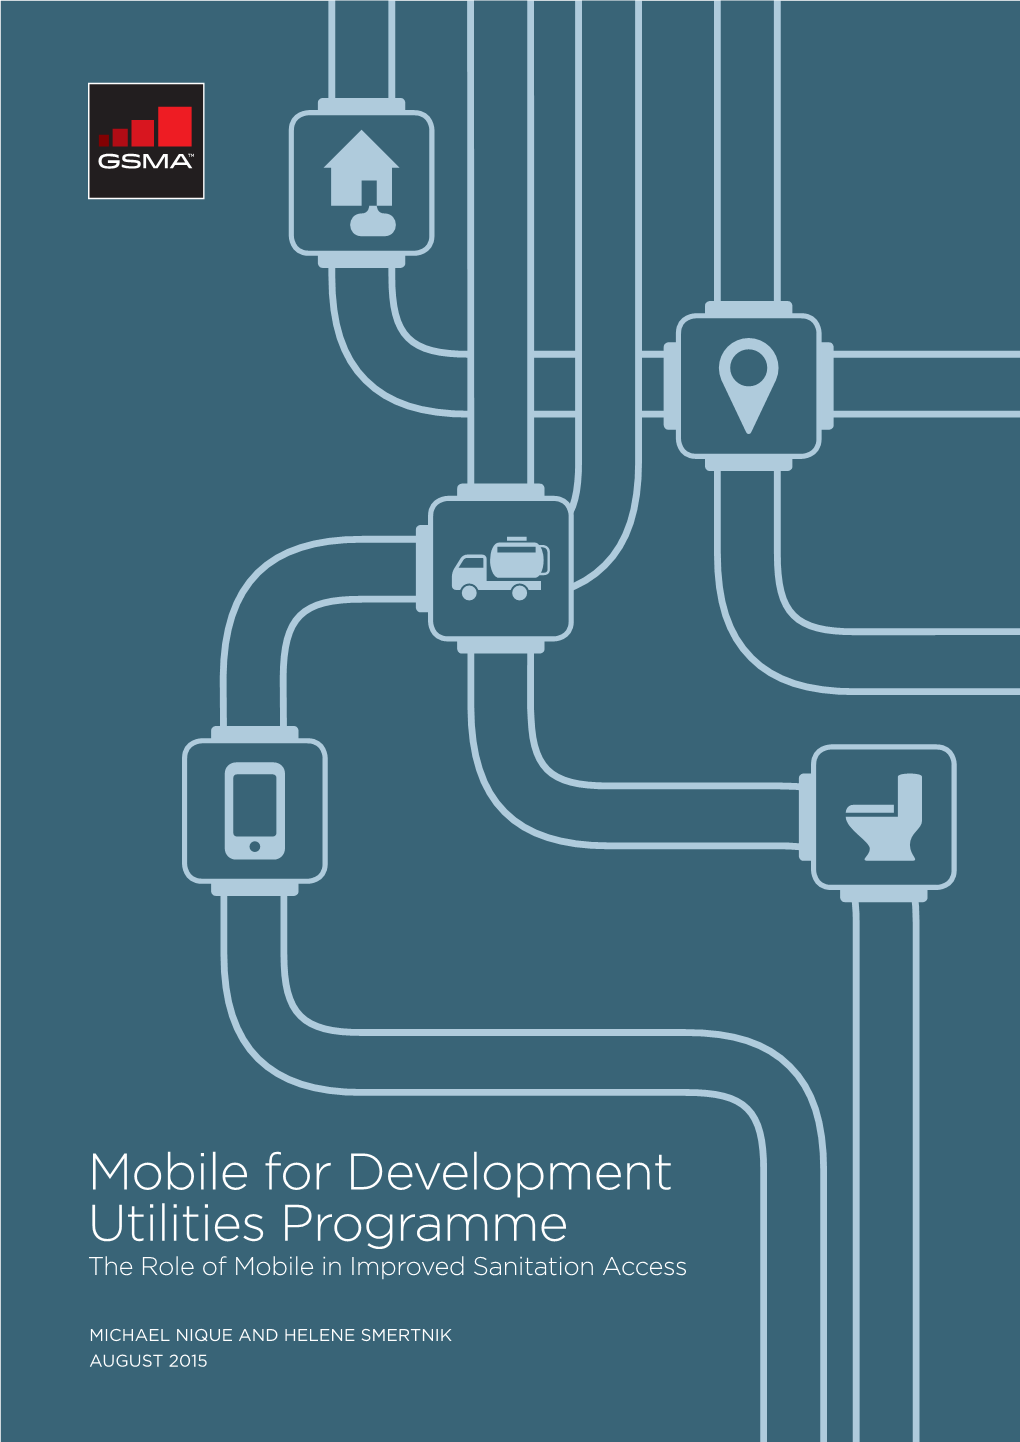 Mobile for Development Utilities Programme the Role of Mobile in Improved Sanitation Access